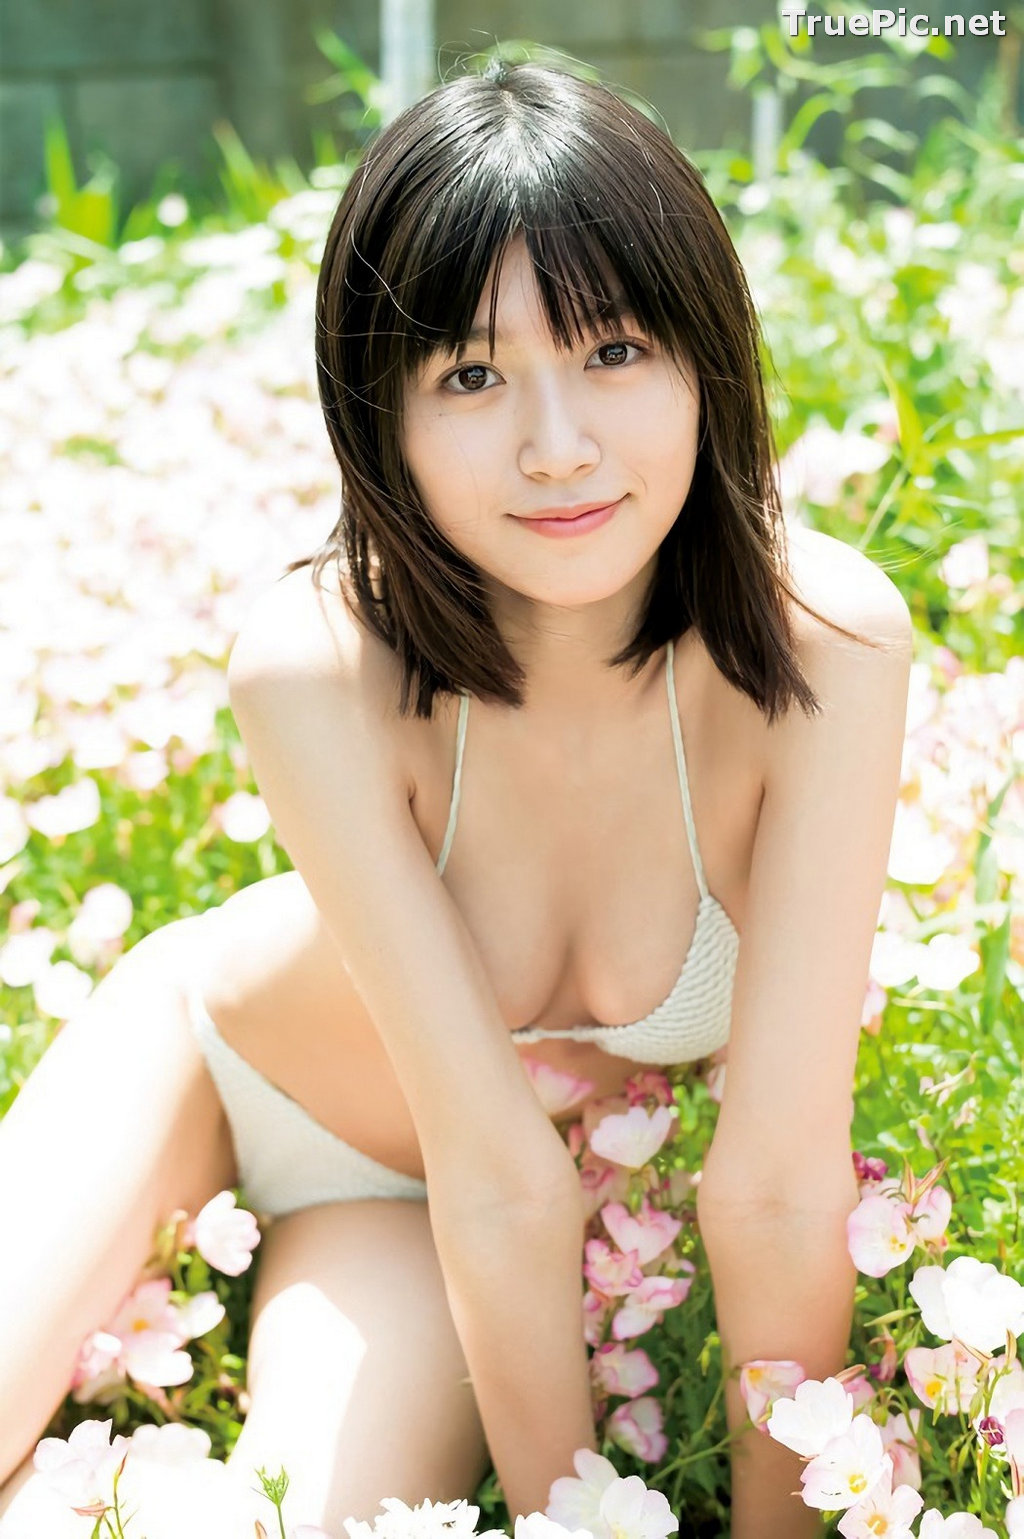 ImageJapanese Gravure Idol and Actress - Kitamuki Miyu (北向珠夕) - Sexy Picture Collection 2020 - TruePic.net - Picture-68